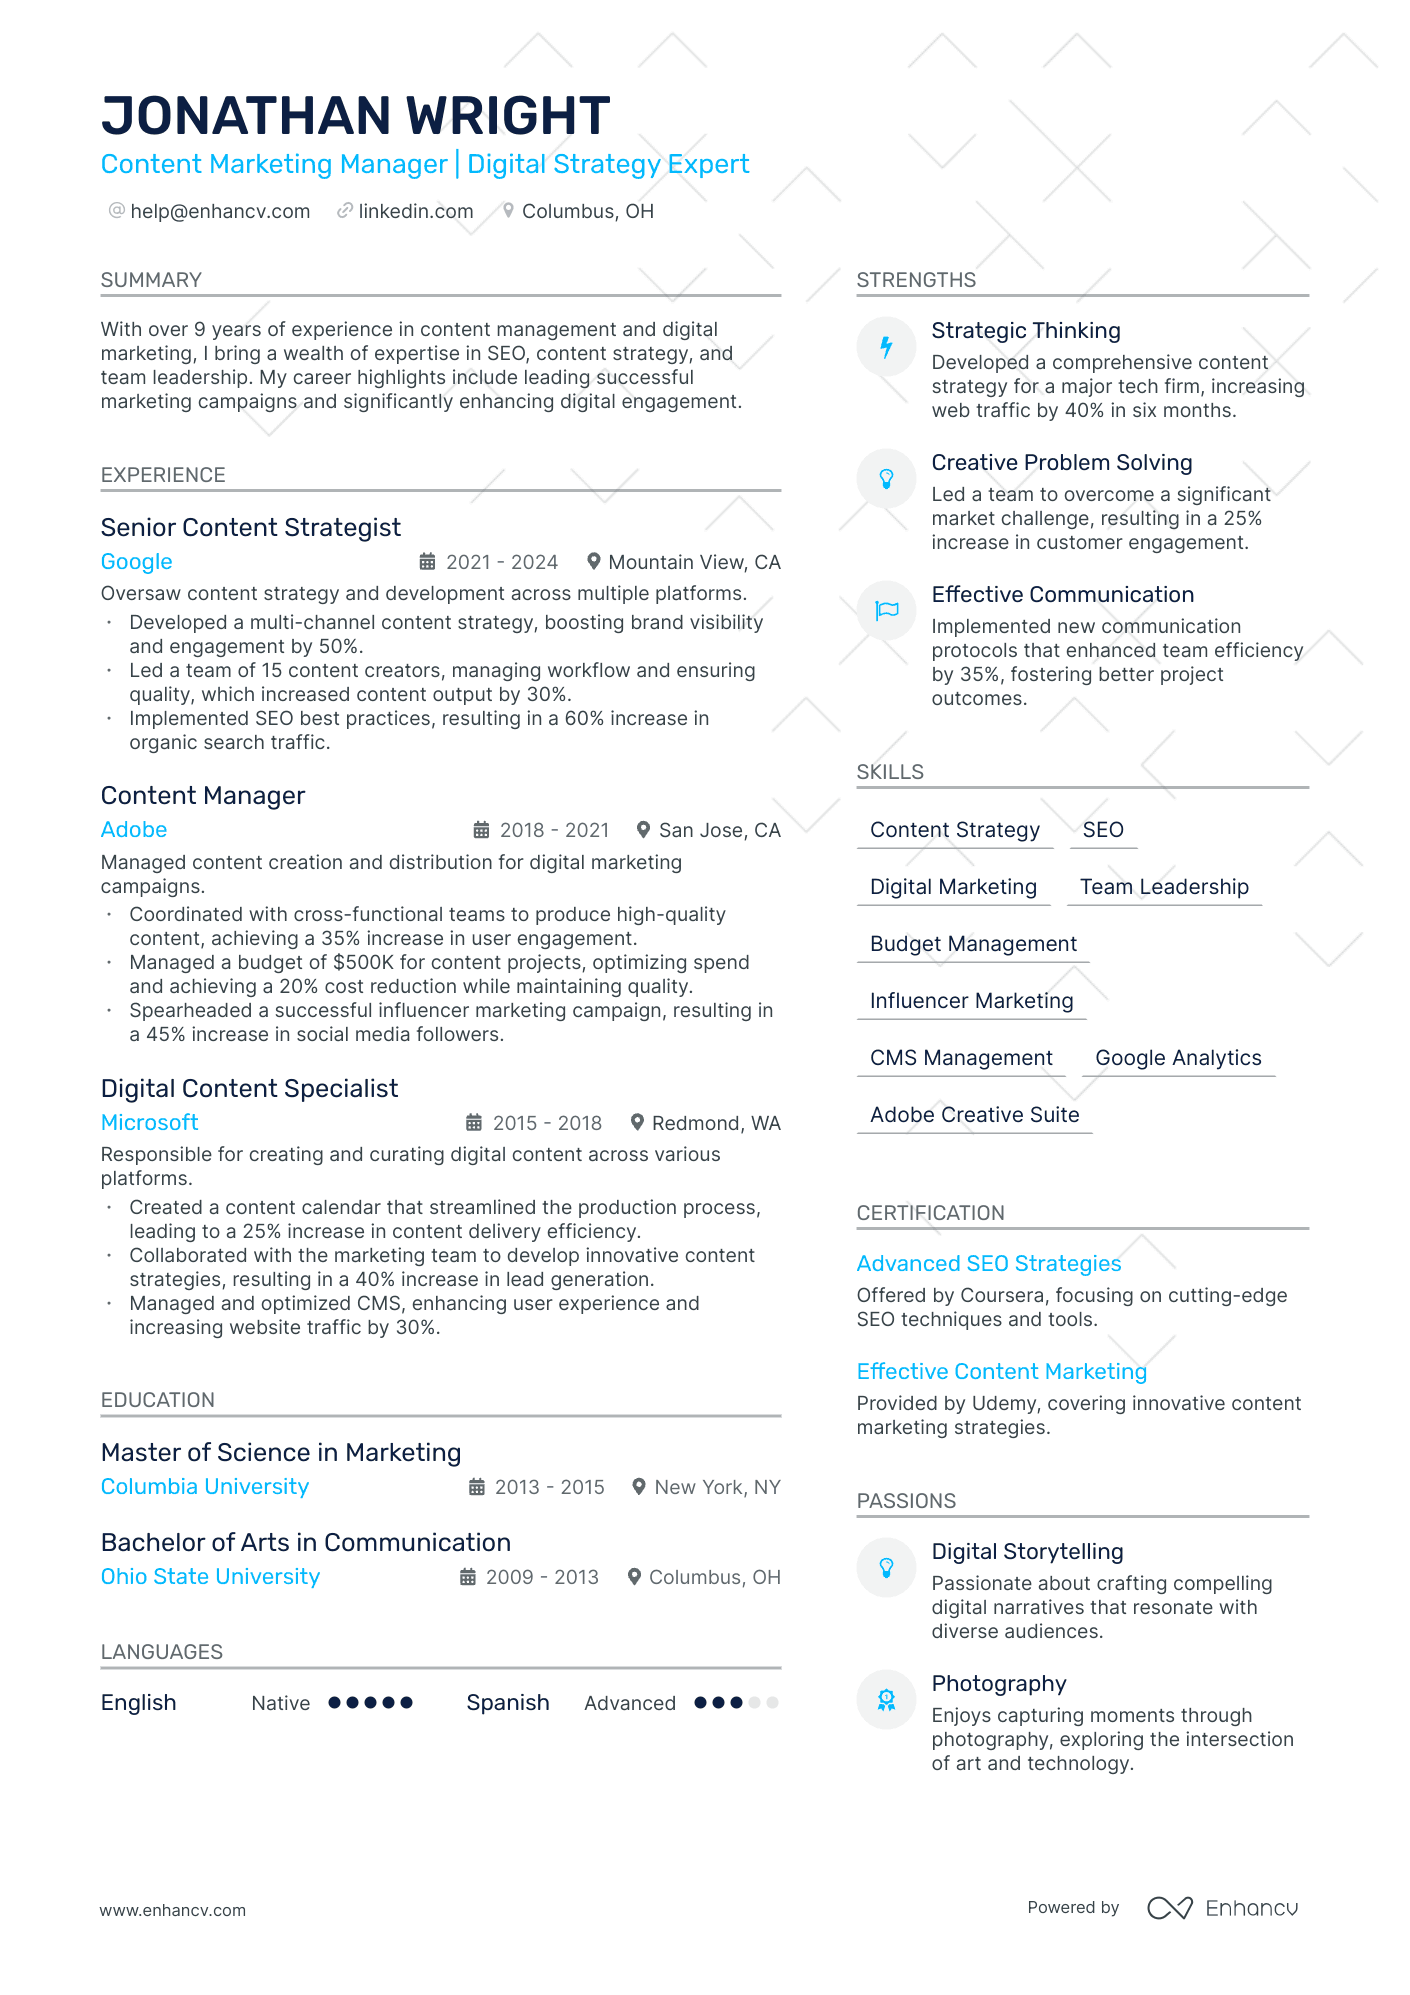 Content Marketing Manager | Digital Strategy Expert resume example